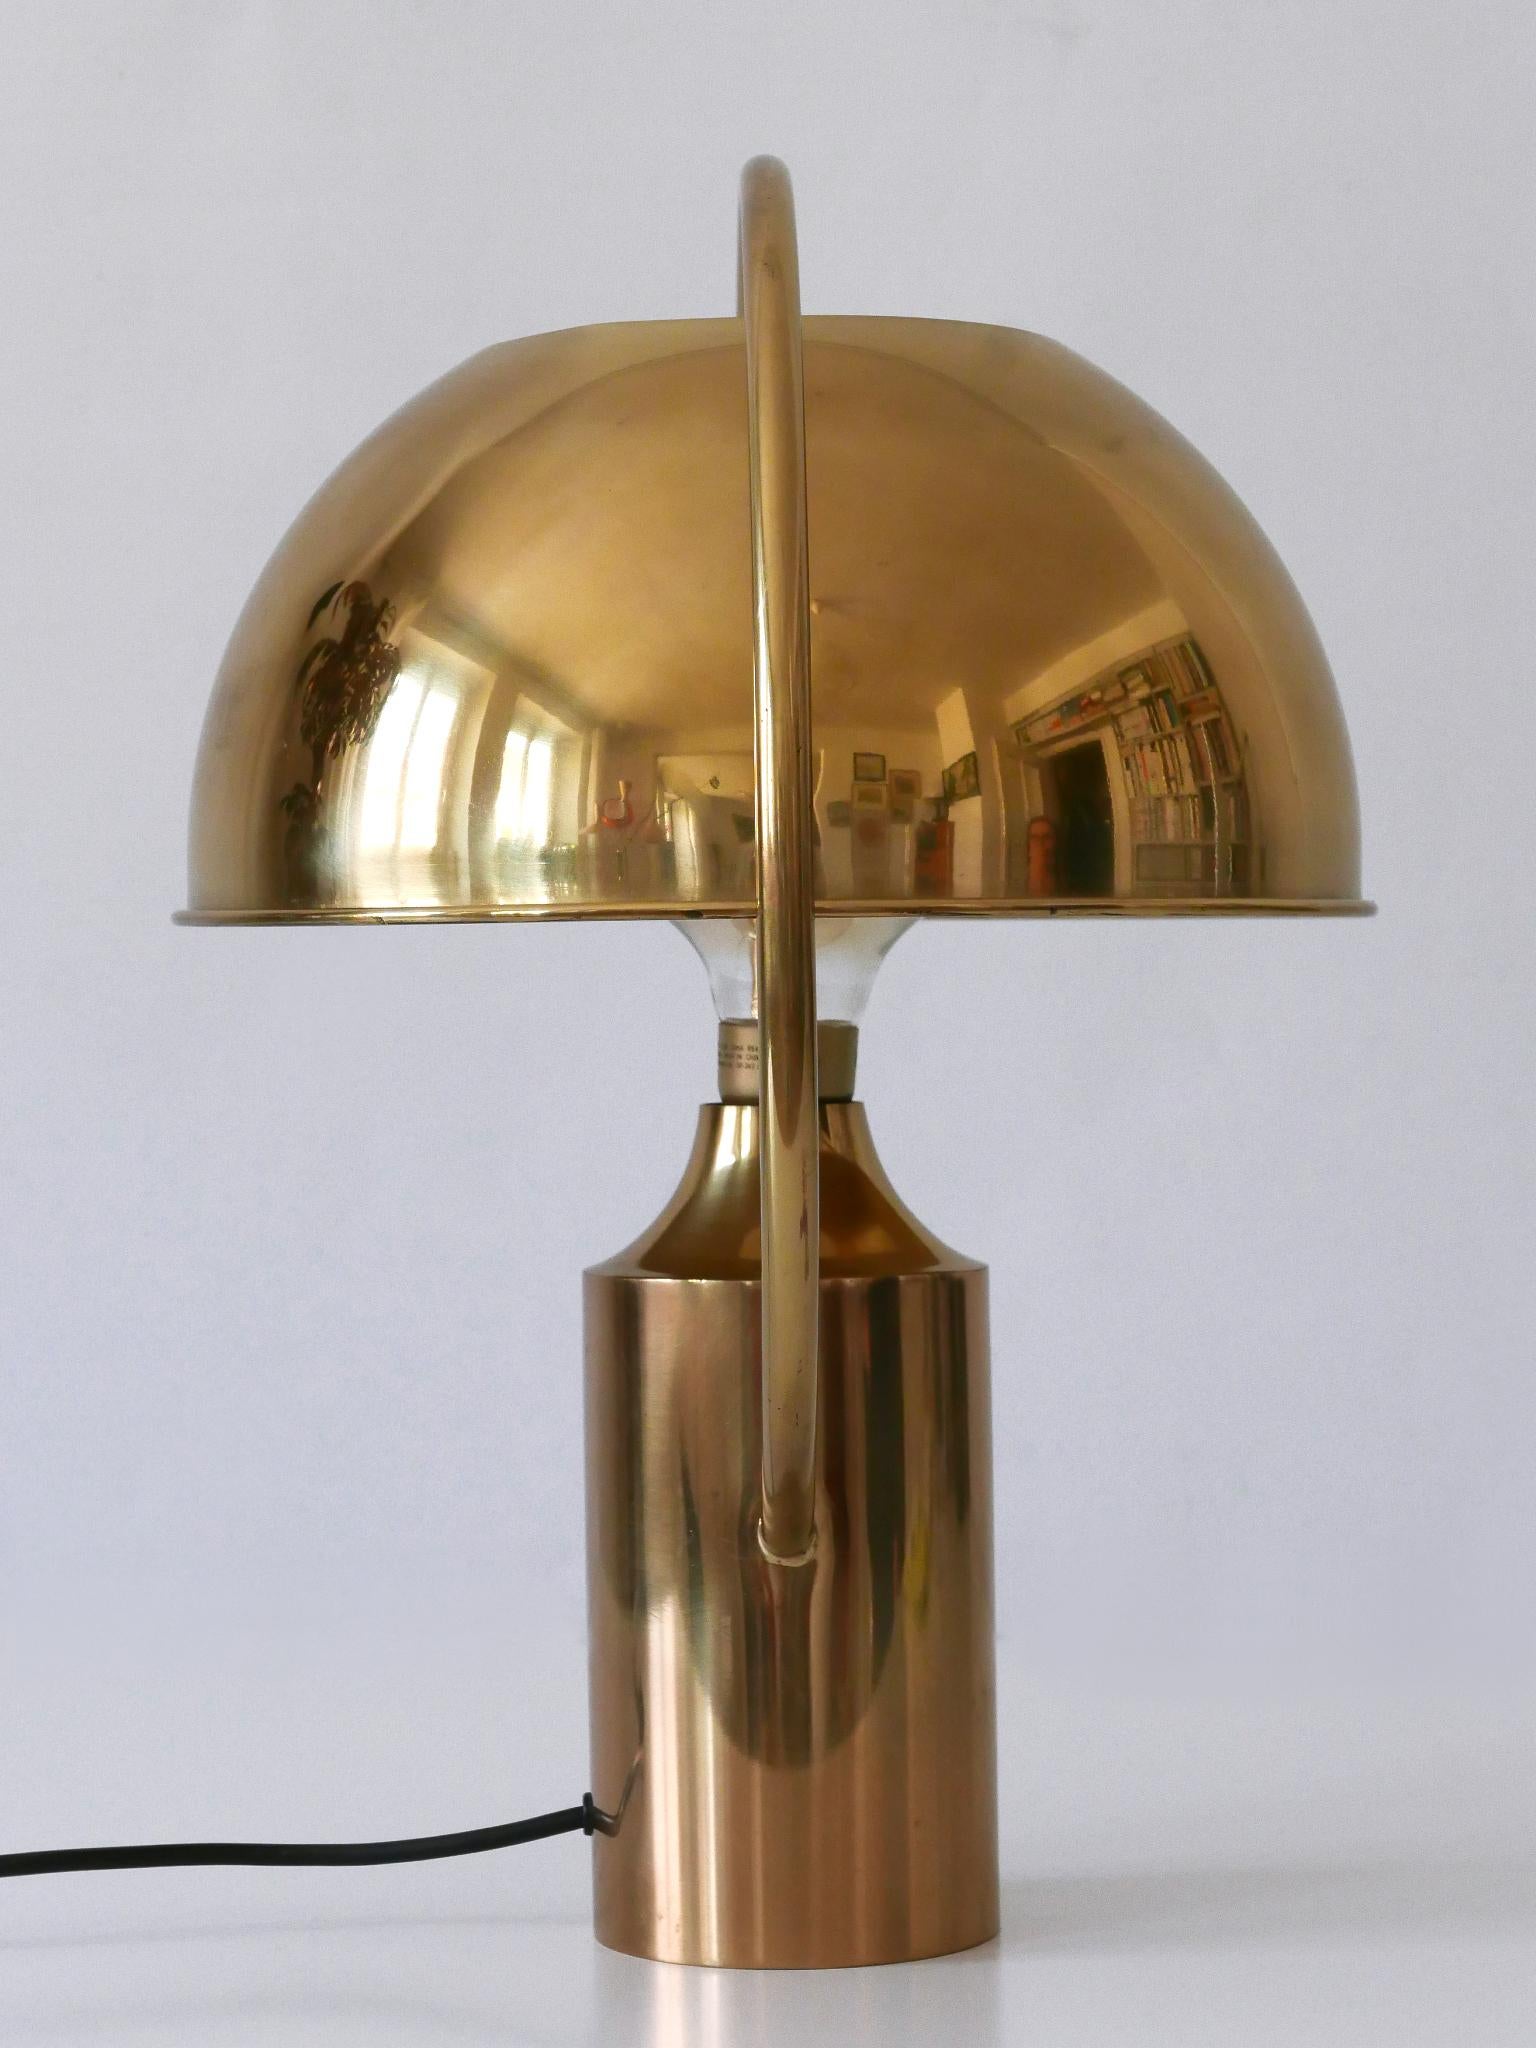 Extremely Rare Mid-Century Modern Table Lamp by Florian Schulz Germany 1970s For Sale 4